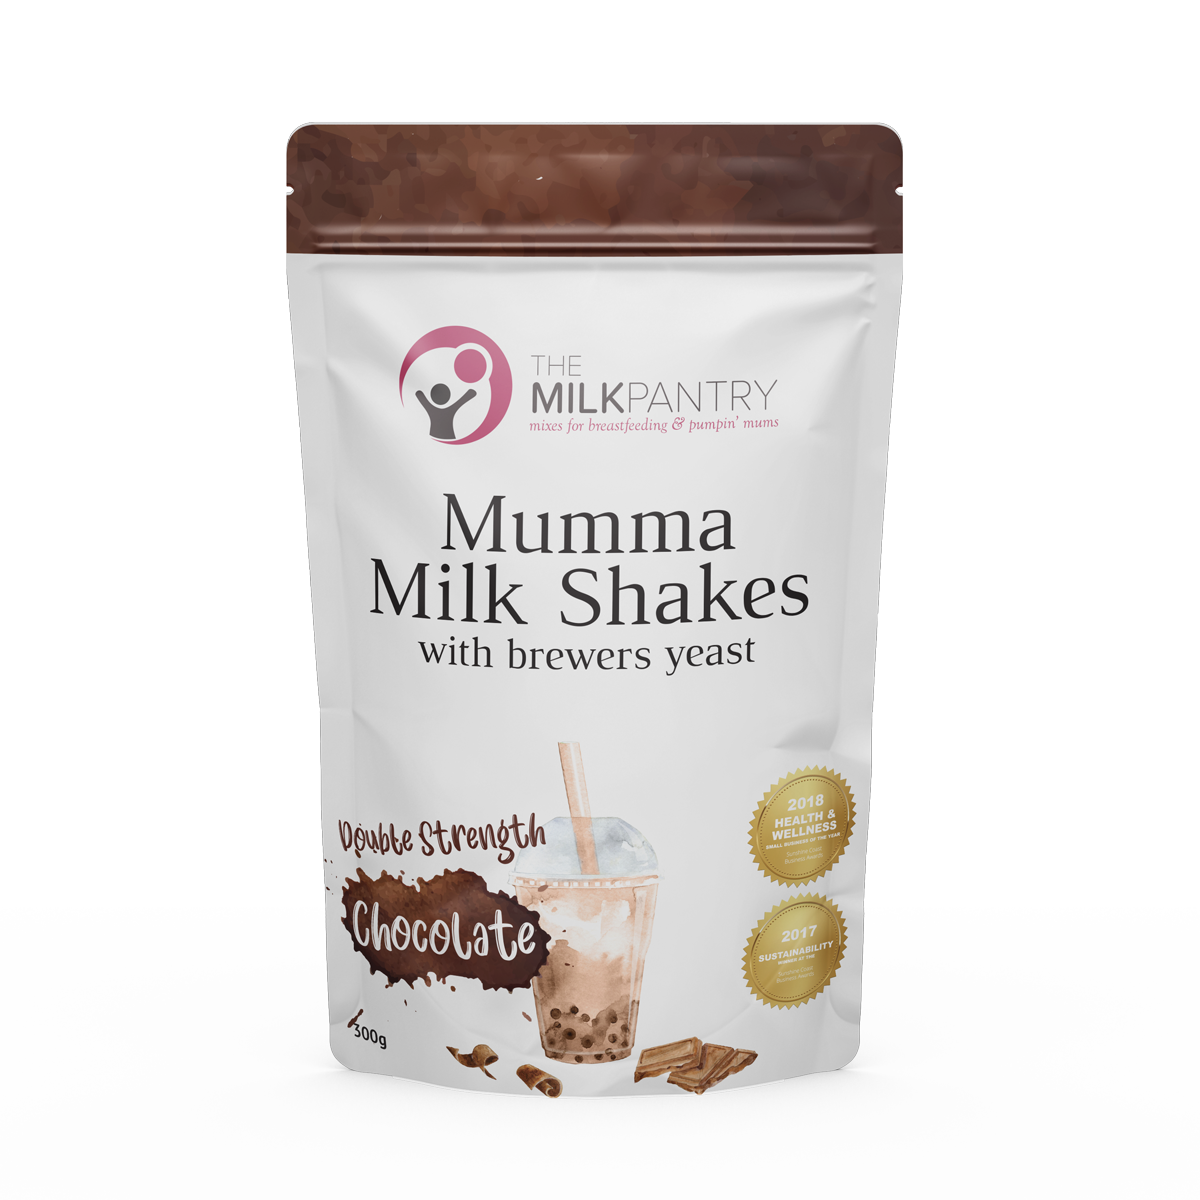 Gluten Free and Plant based Chocolate Milk Shakes